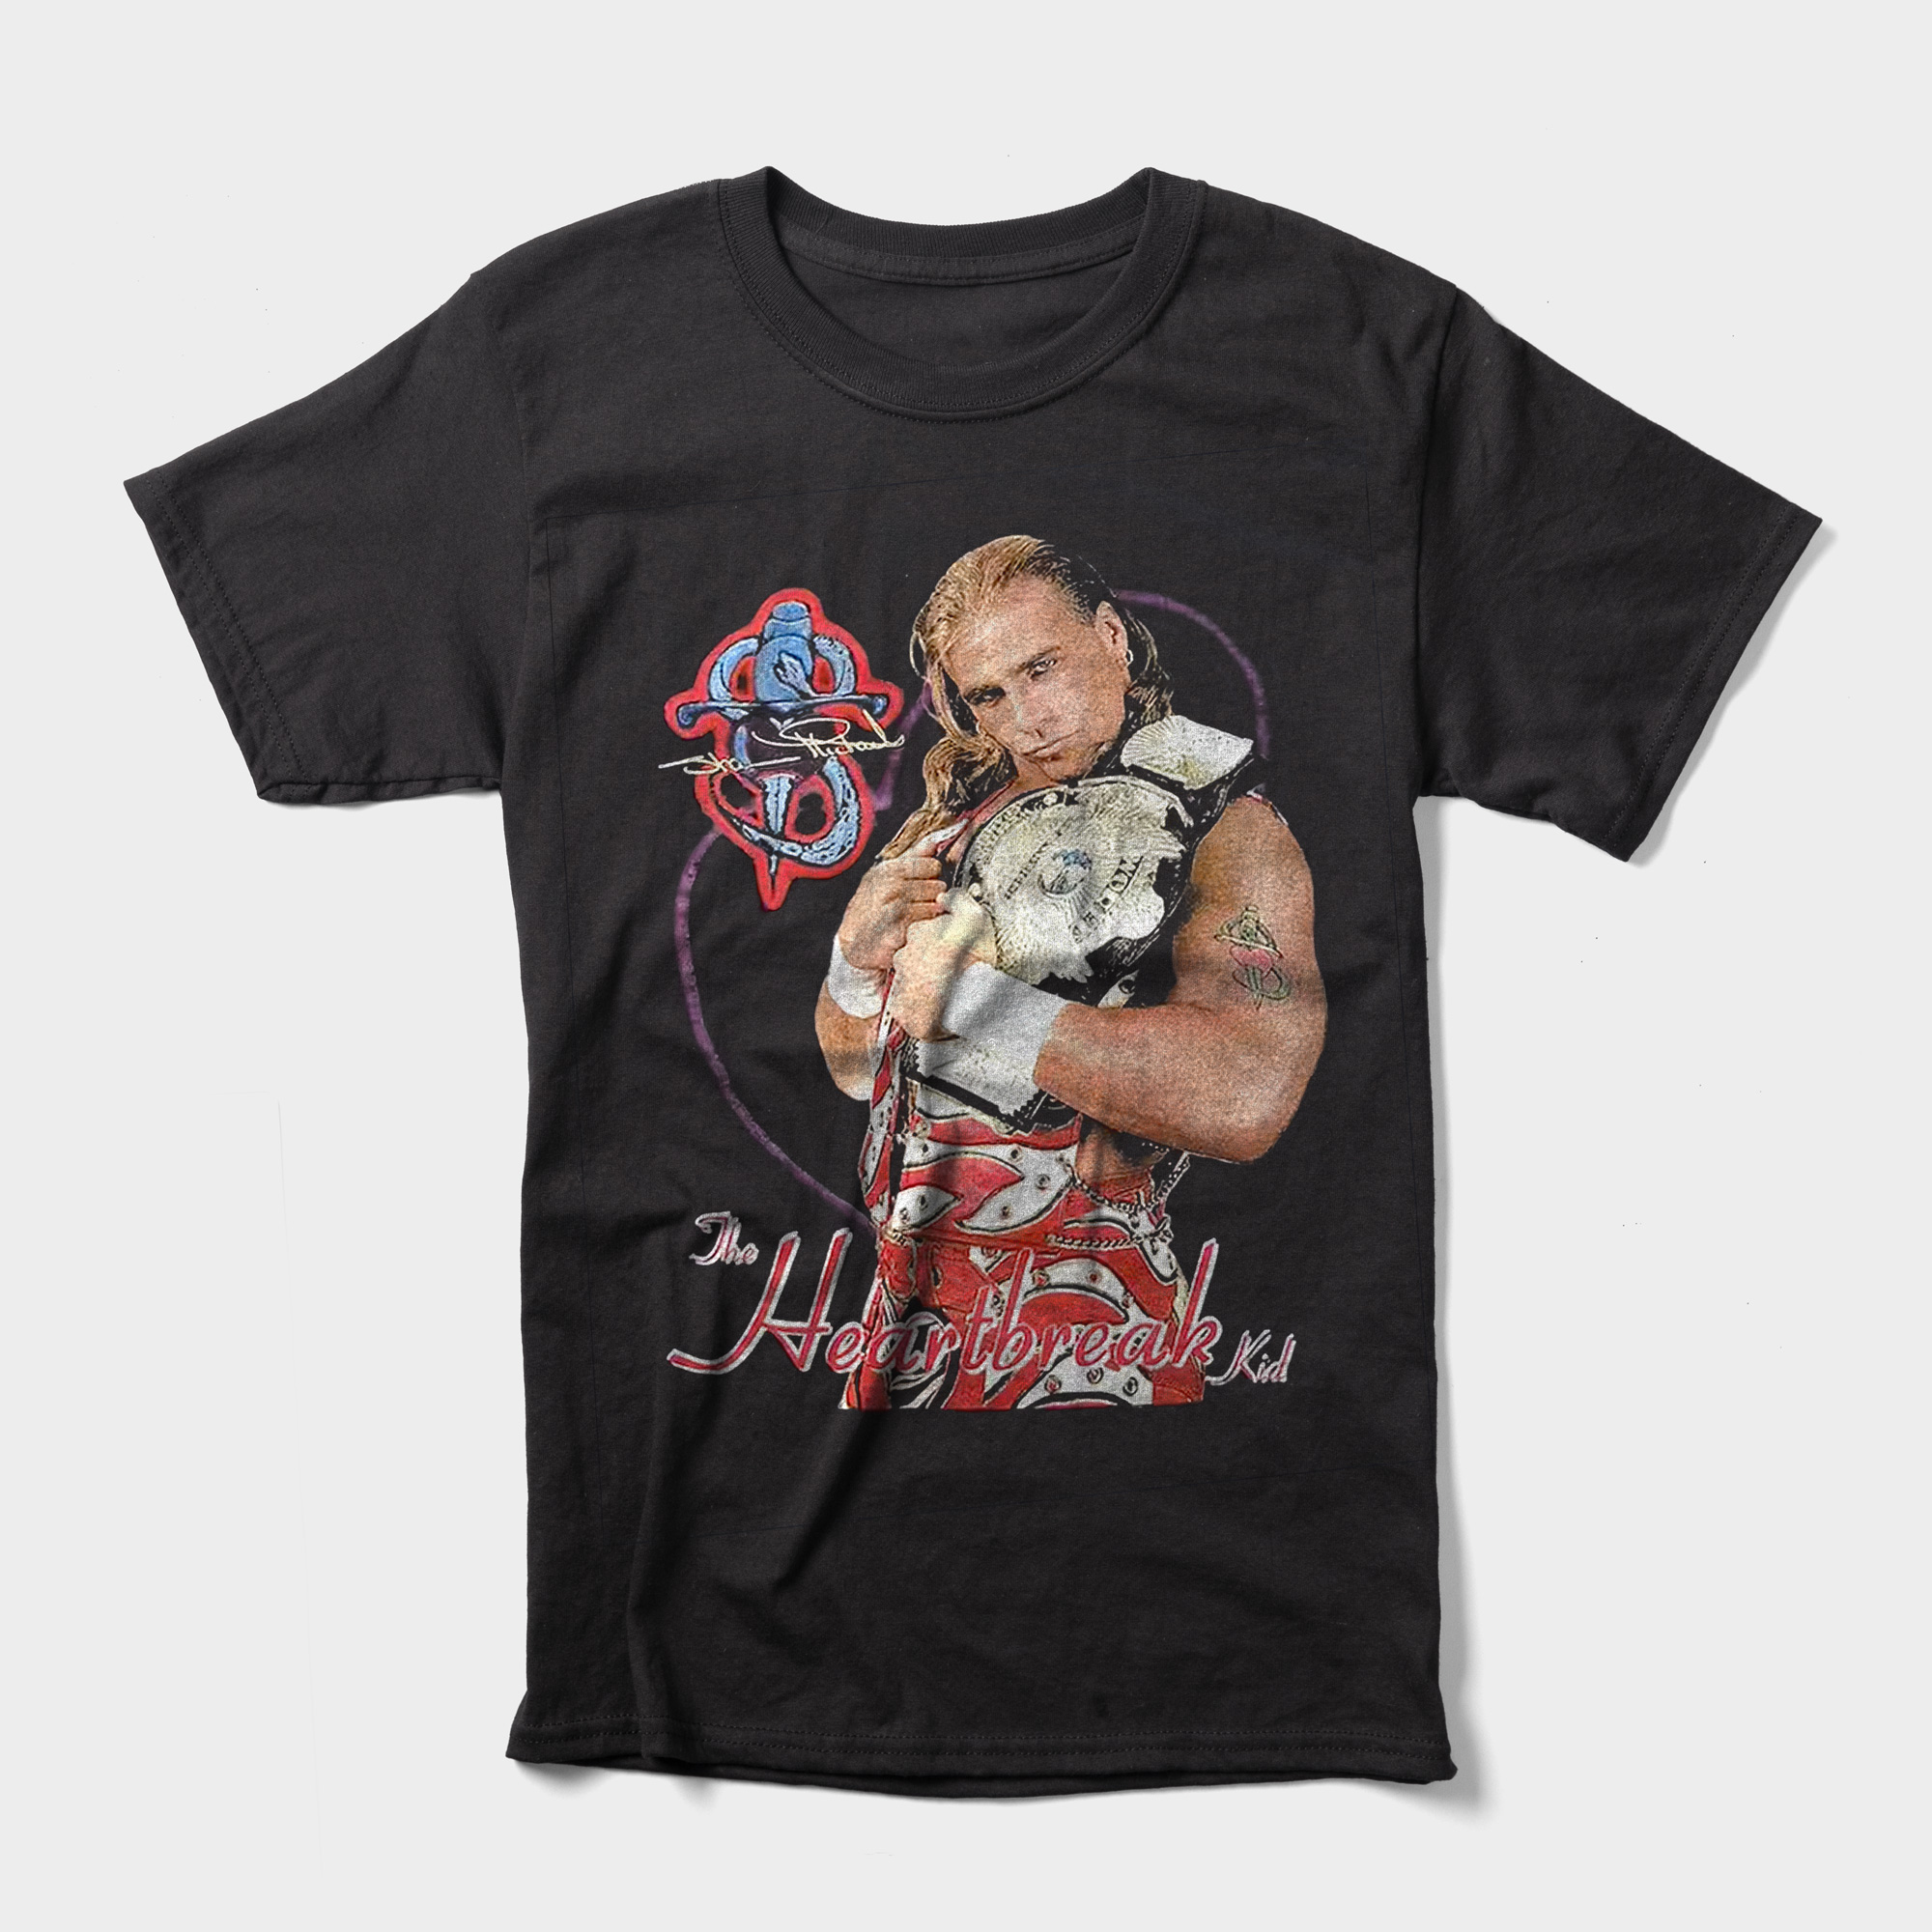 Shawn Michaels' Wrestlemania shirt commemorates one of his greatest performances and rivalries against Bret Hart. 